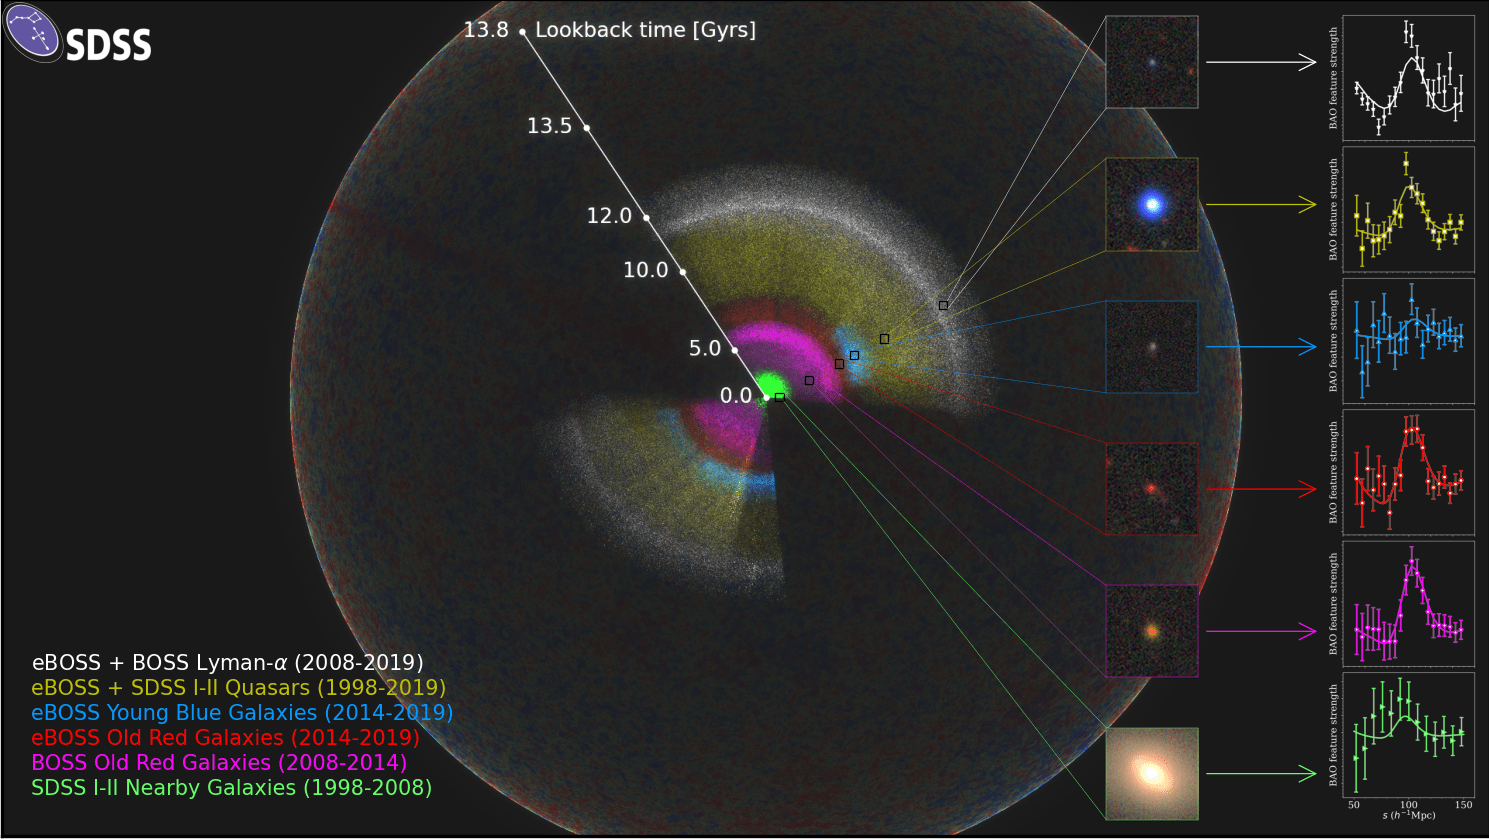 A snapshot of the new map, showing the positions and distances of celestial objects from now until the moment of the Big Bang some 13.8 billion years ago.  (Image: SDSS)